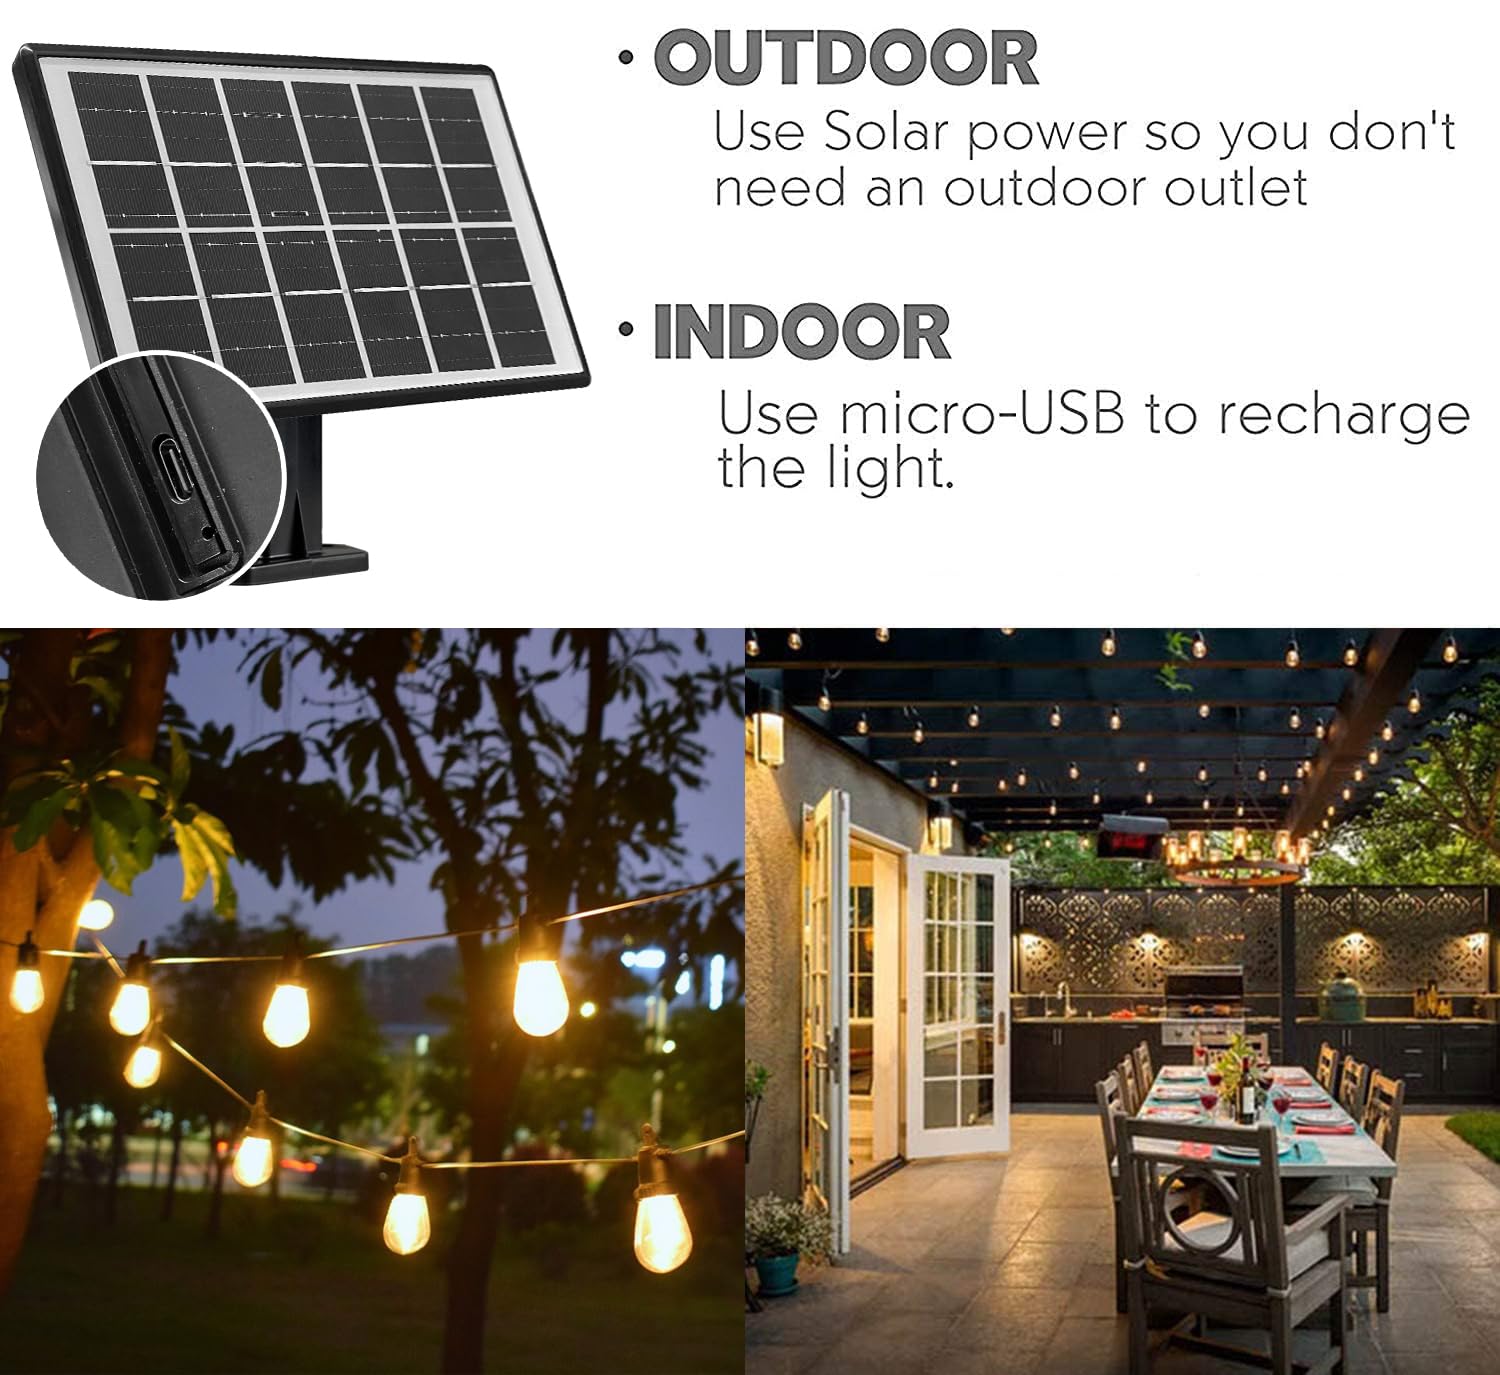 SUNTHIN Outdoor Solar String Lights, 48ft Solar Patio Lights with USB Rechargeable, Waterproof & Shatterproof Solar Powered Bulb